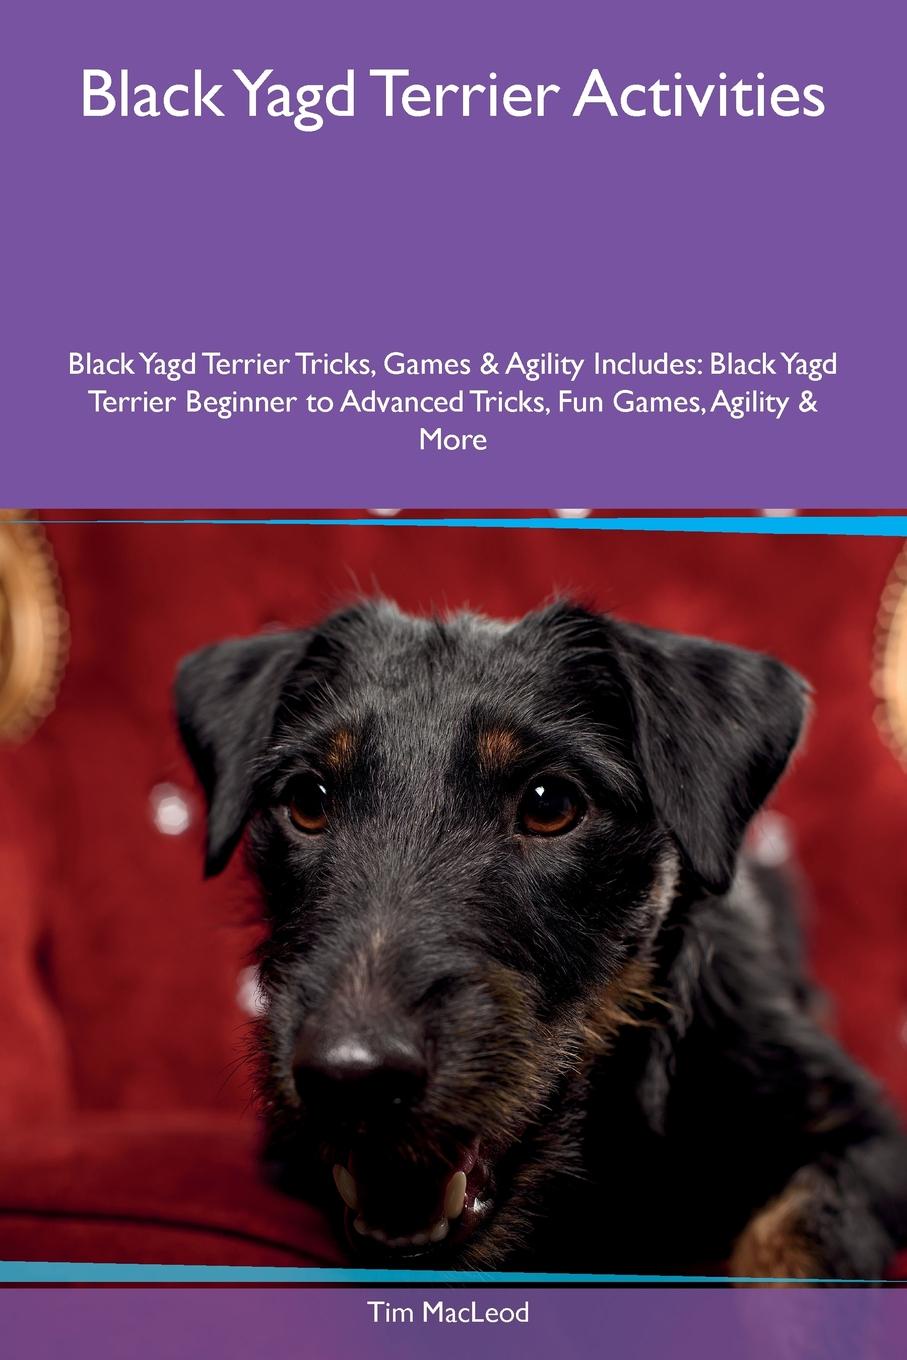 Black Yagd Terrier Activities Black Yagd Terrier Tricks, Games & Agility Includes. Black Yagd Terrier Beginner to Advanced Tricks, Fun Games, Agility & More